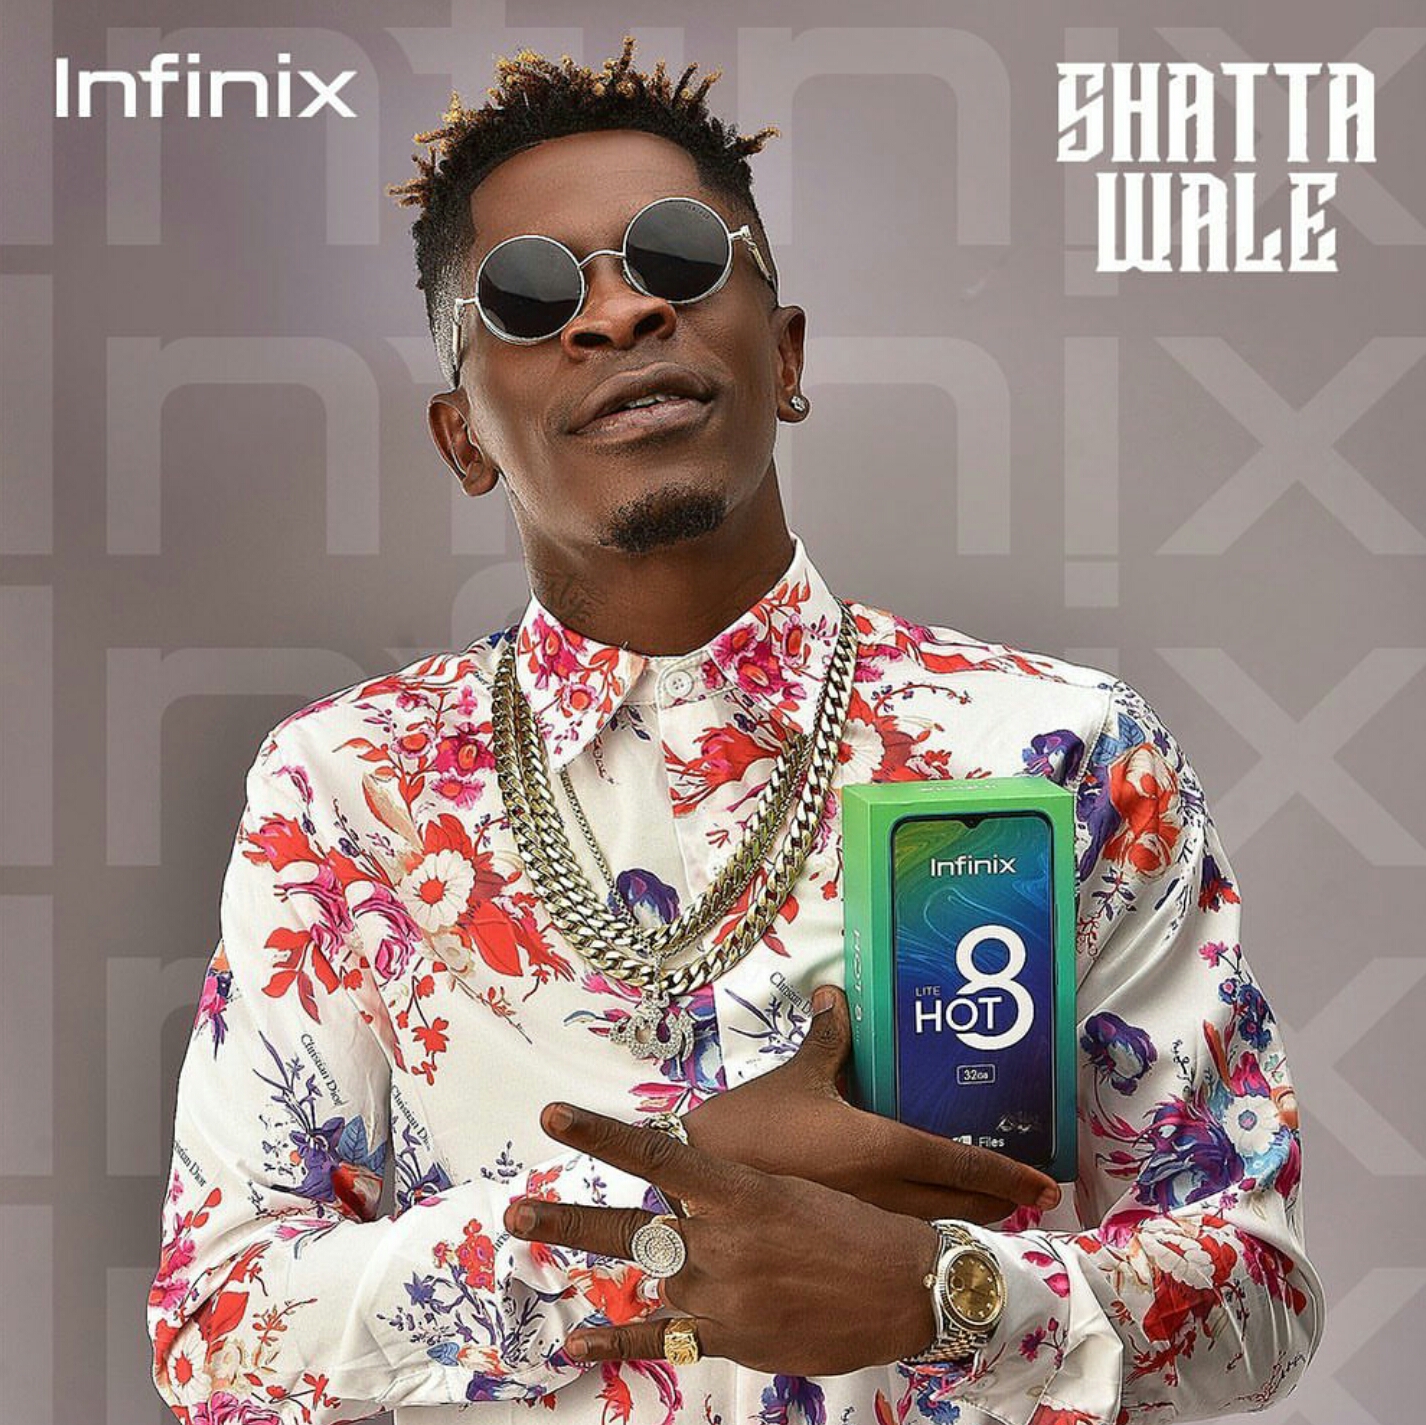 Shatta Wale secures partnership deal with Infinix